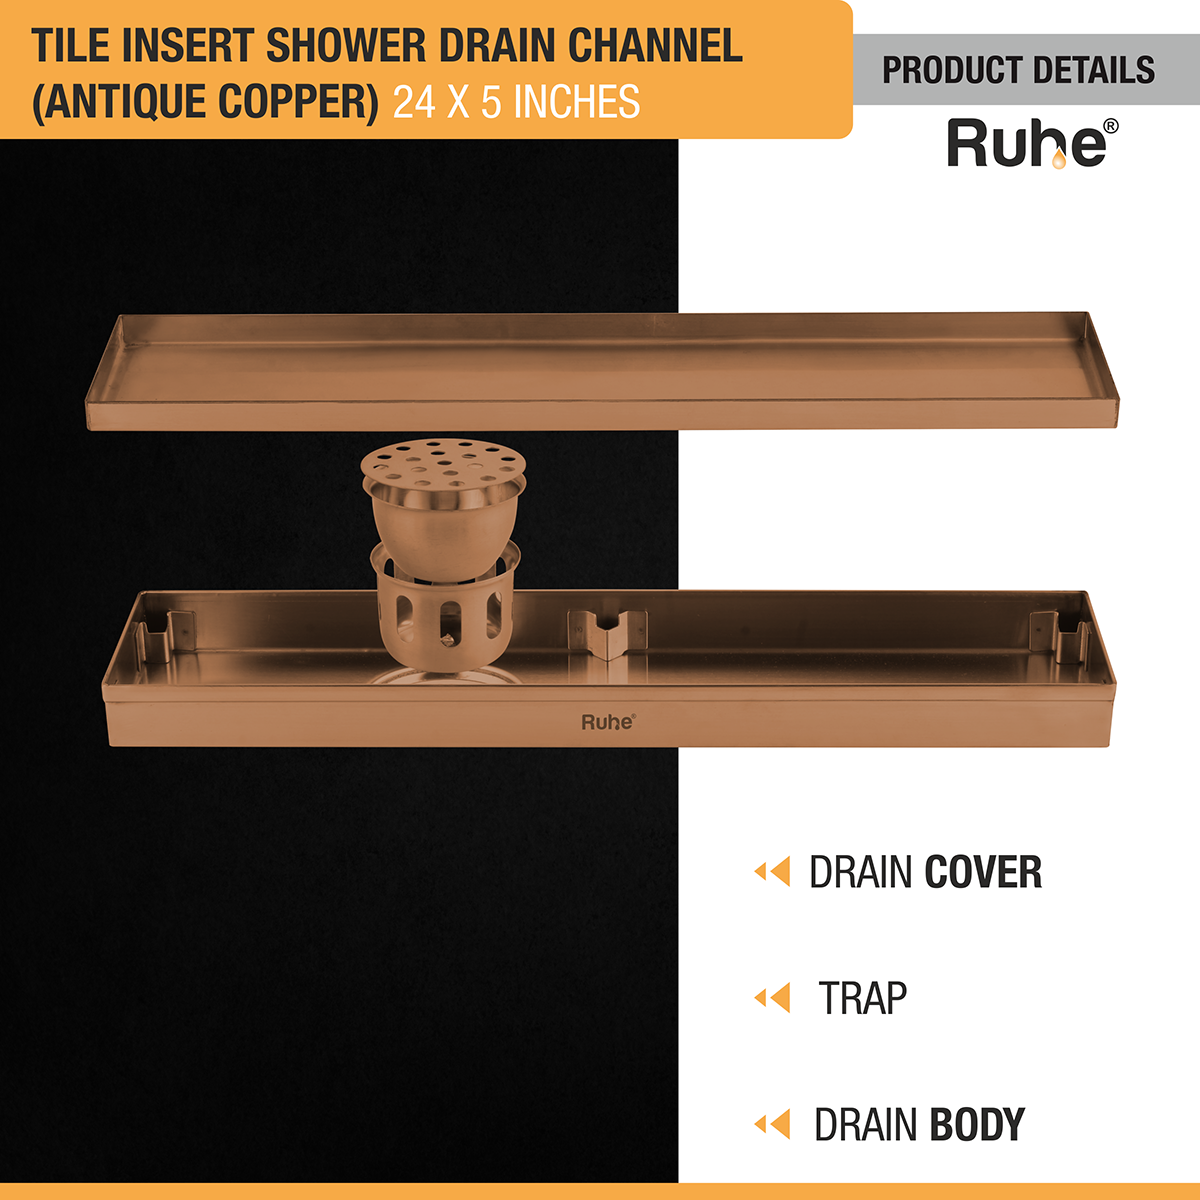 Tile Insert Shower Drain Channel (24 x 5 Inches) ROSE GOLD PVD Coated drain cover, trap, and drain body